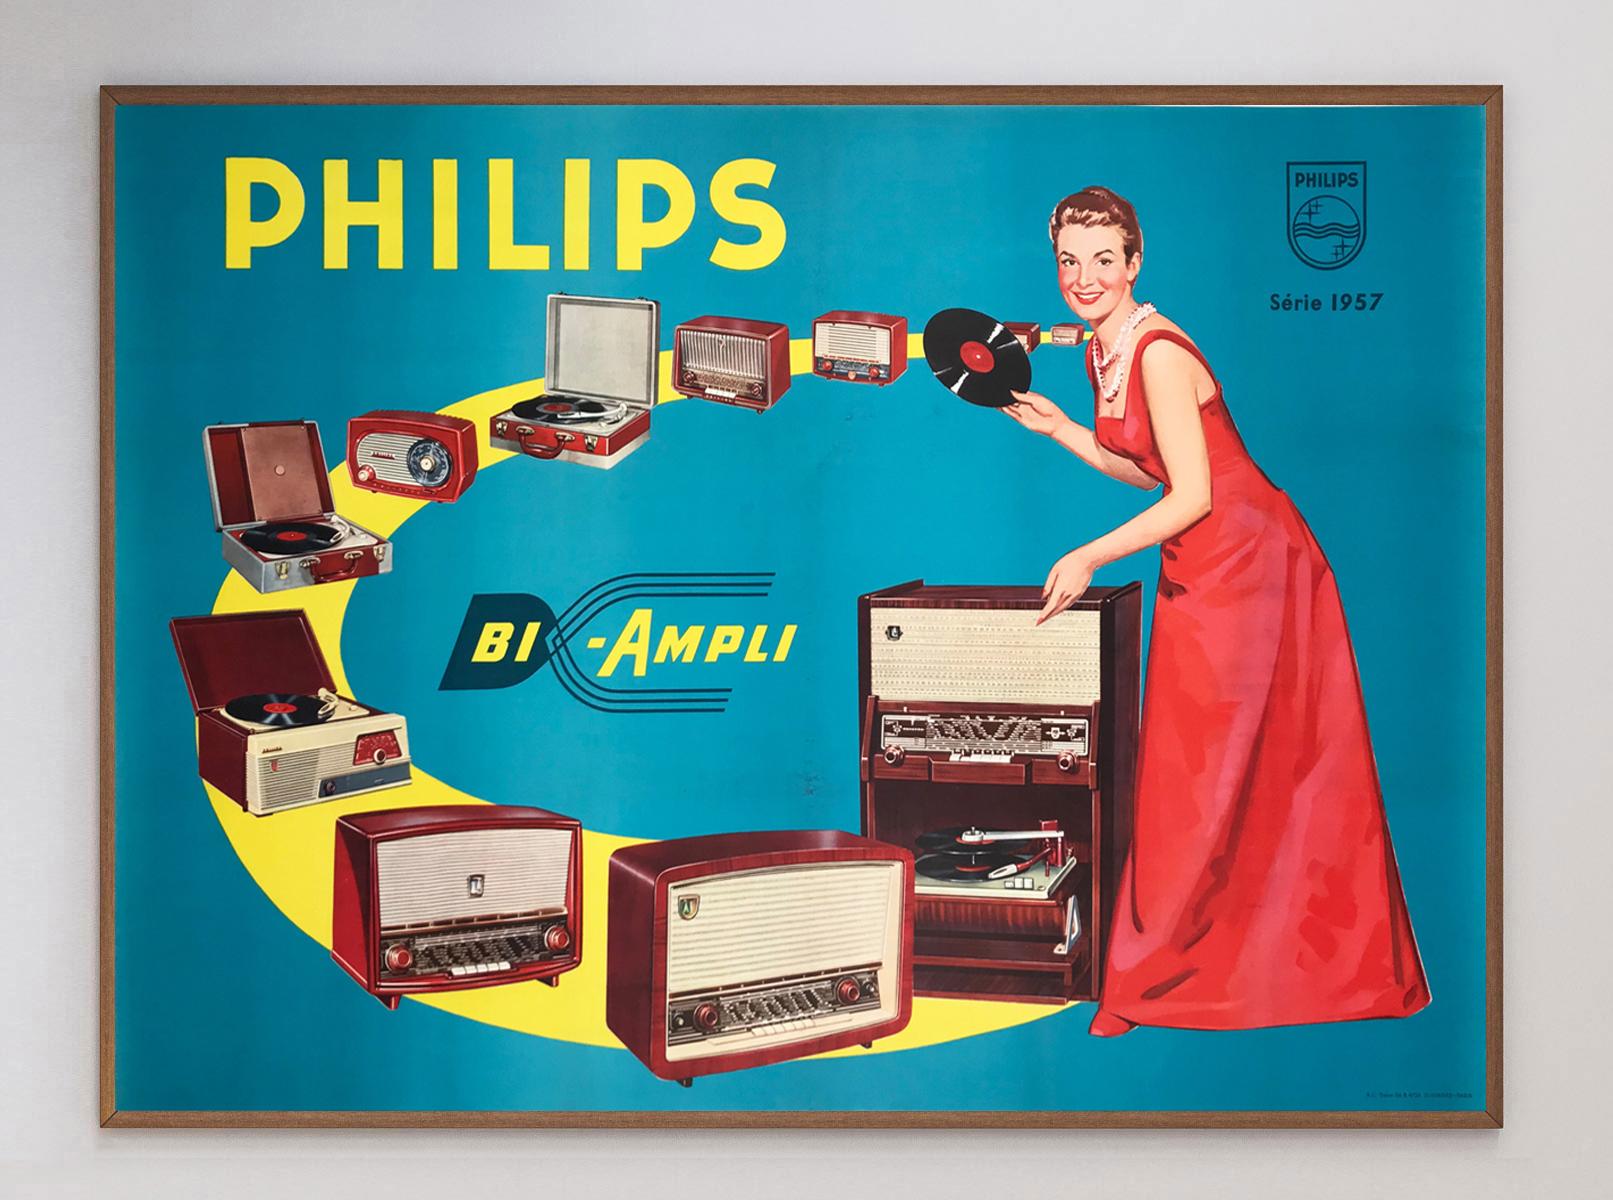 Wonderful & charming poster for Dutch electronics brand Philips. Founded in 1891, Philips was one of the biggest electronics brands in the UK and continues to trade today, focusing on health technology.

With artwork from Elvinger, this beautiful